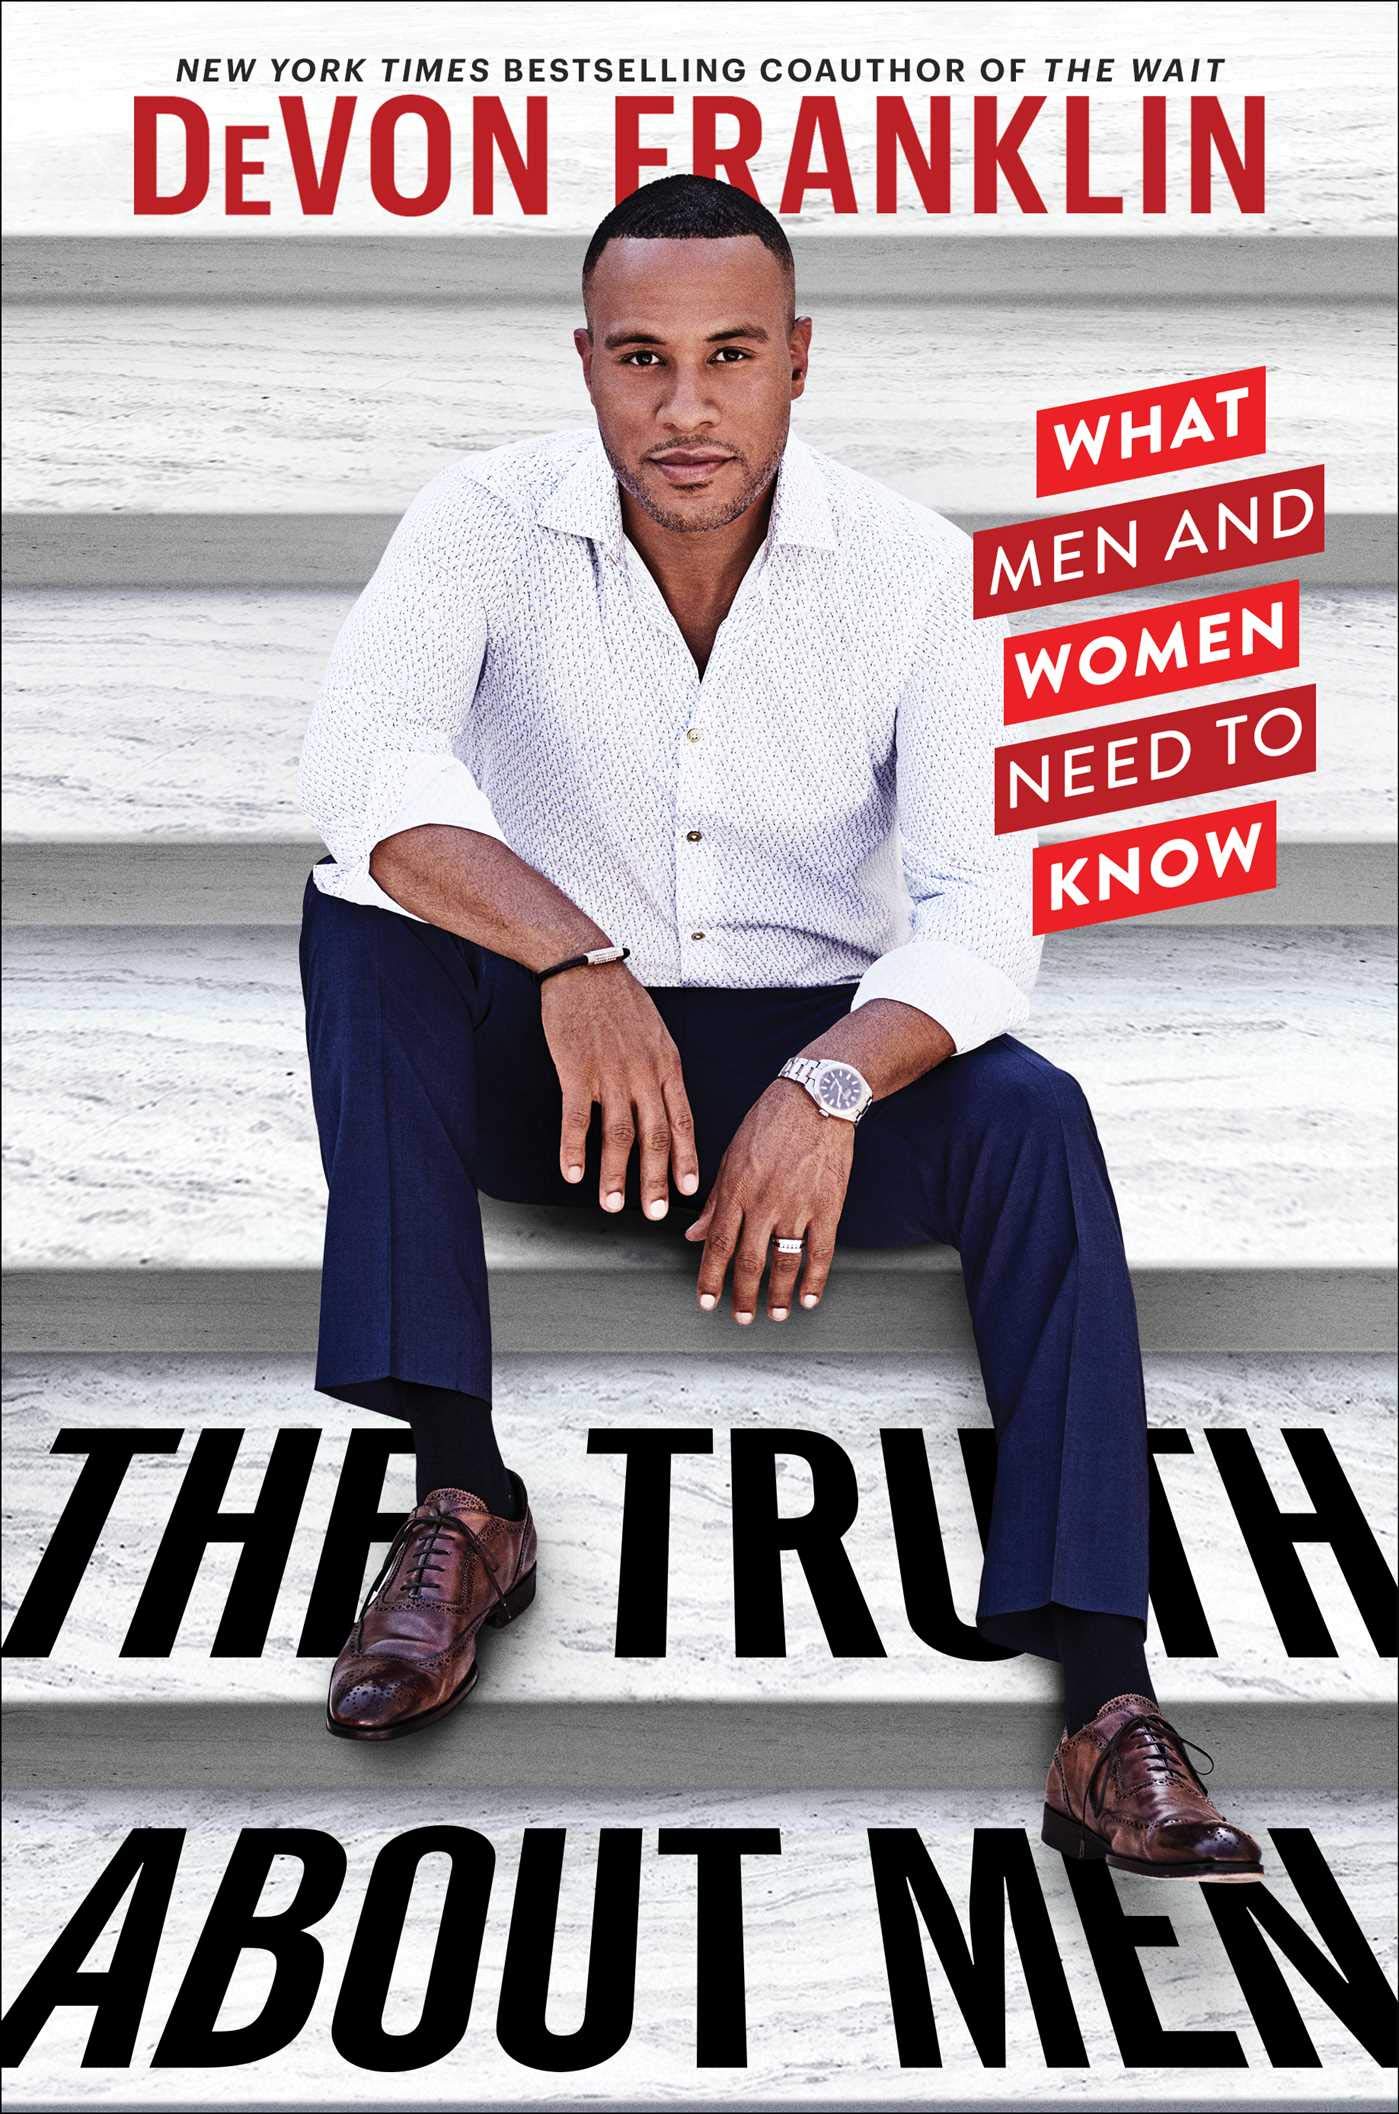 The Truth About Men: What Men and Women Need to Know Hardcover – 7 Feb 2019